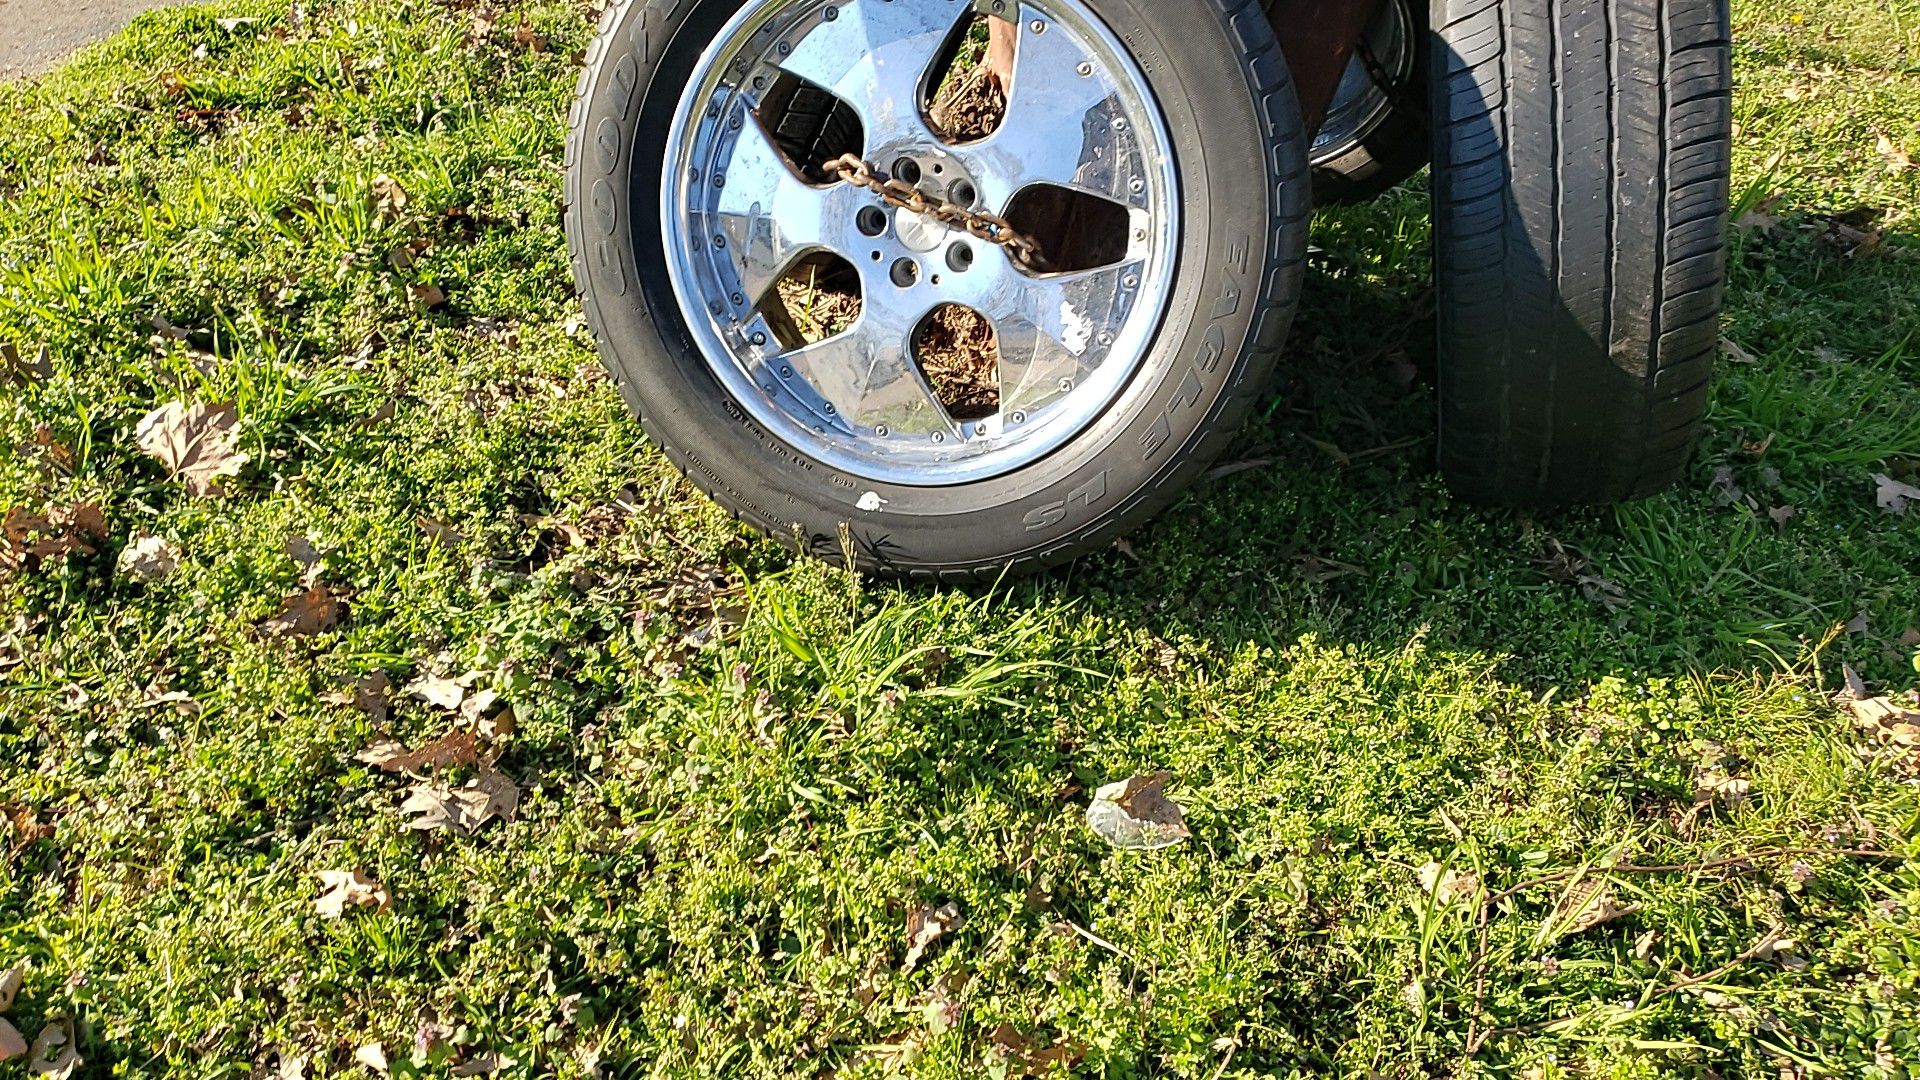 20 inch truck tires and rims. Dont know anything about bolt patterns. Just know there all good shape. Want last long. 20' INCH ON TIRES